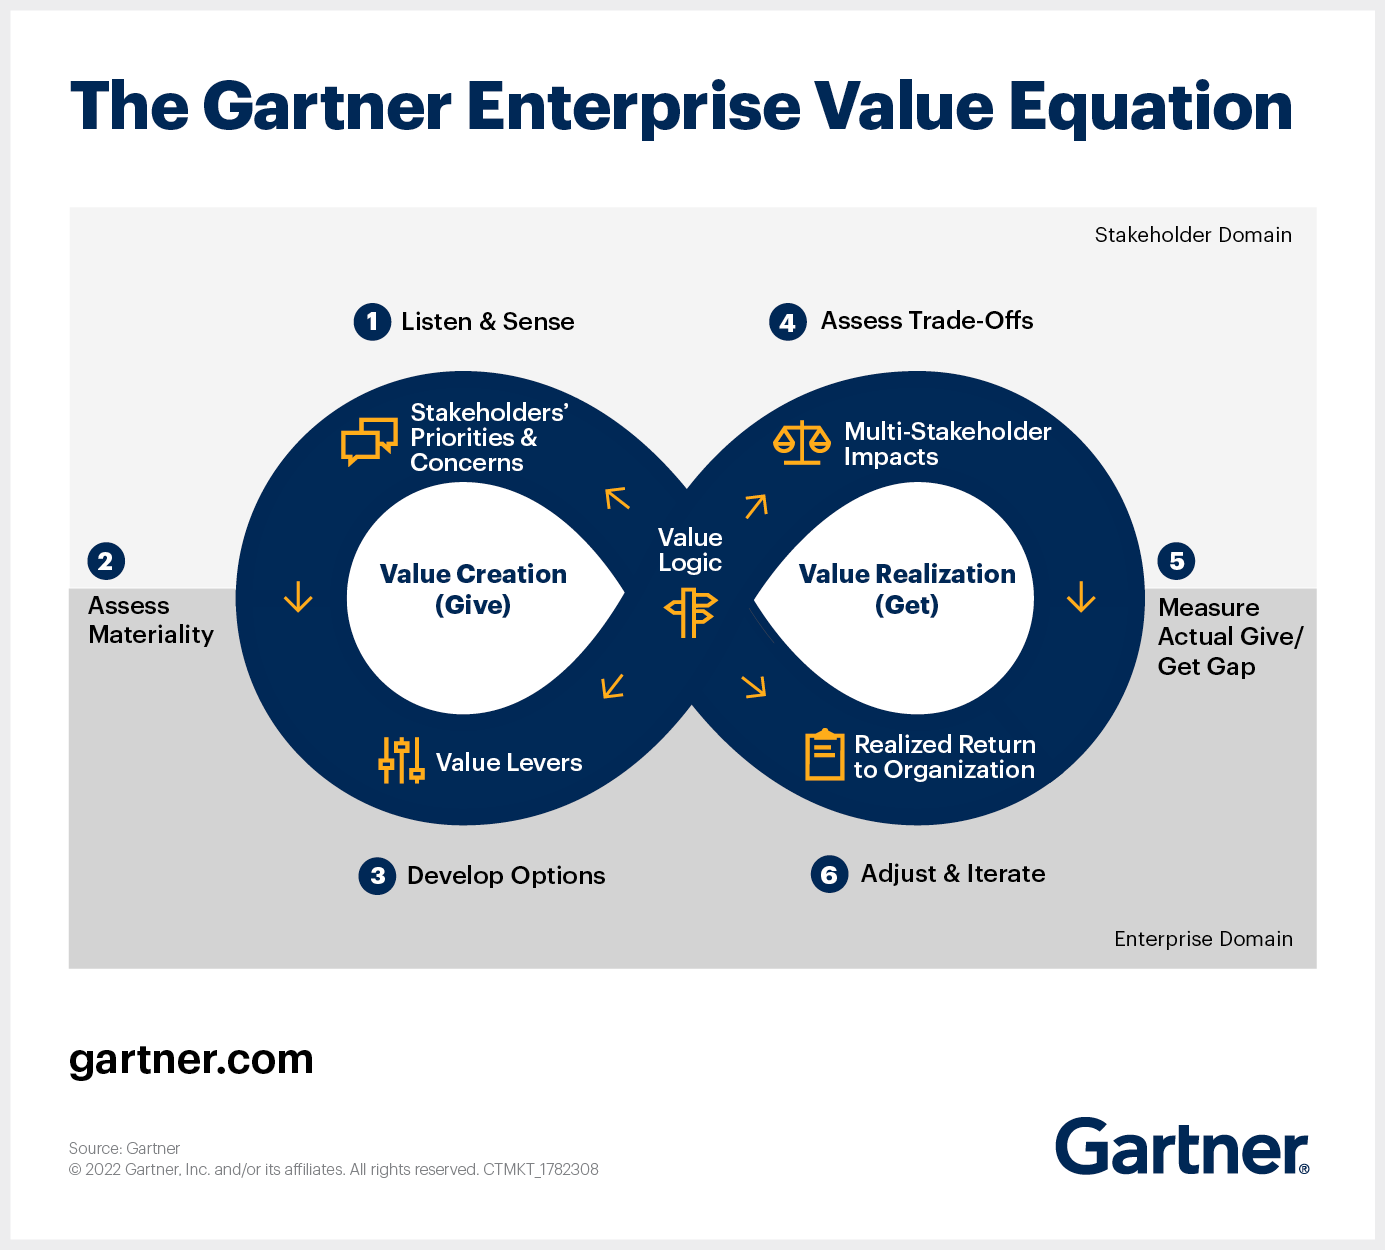 Gartner's new enterprise value formula accounts for the exchange of value with stakeholders, not just value received.